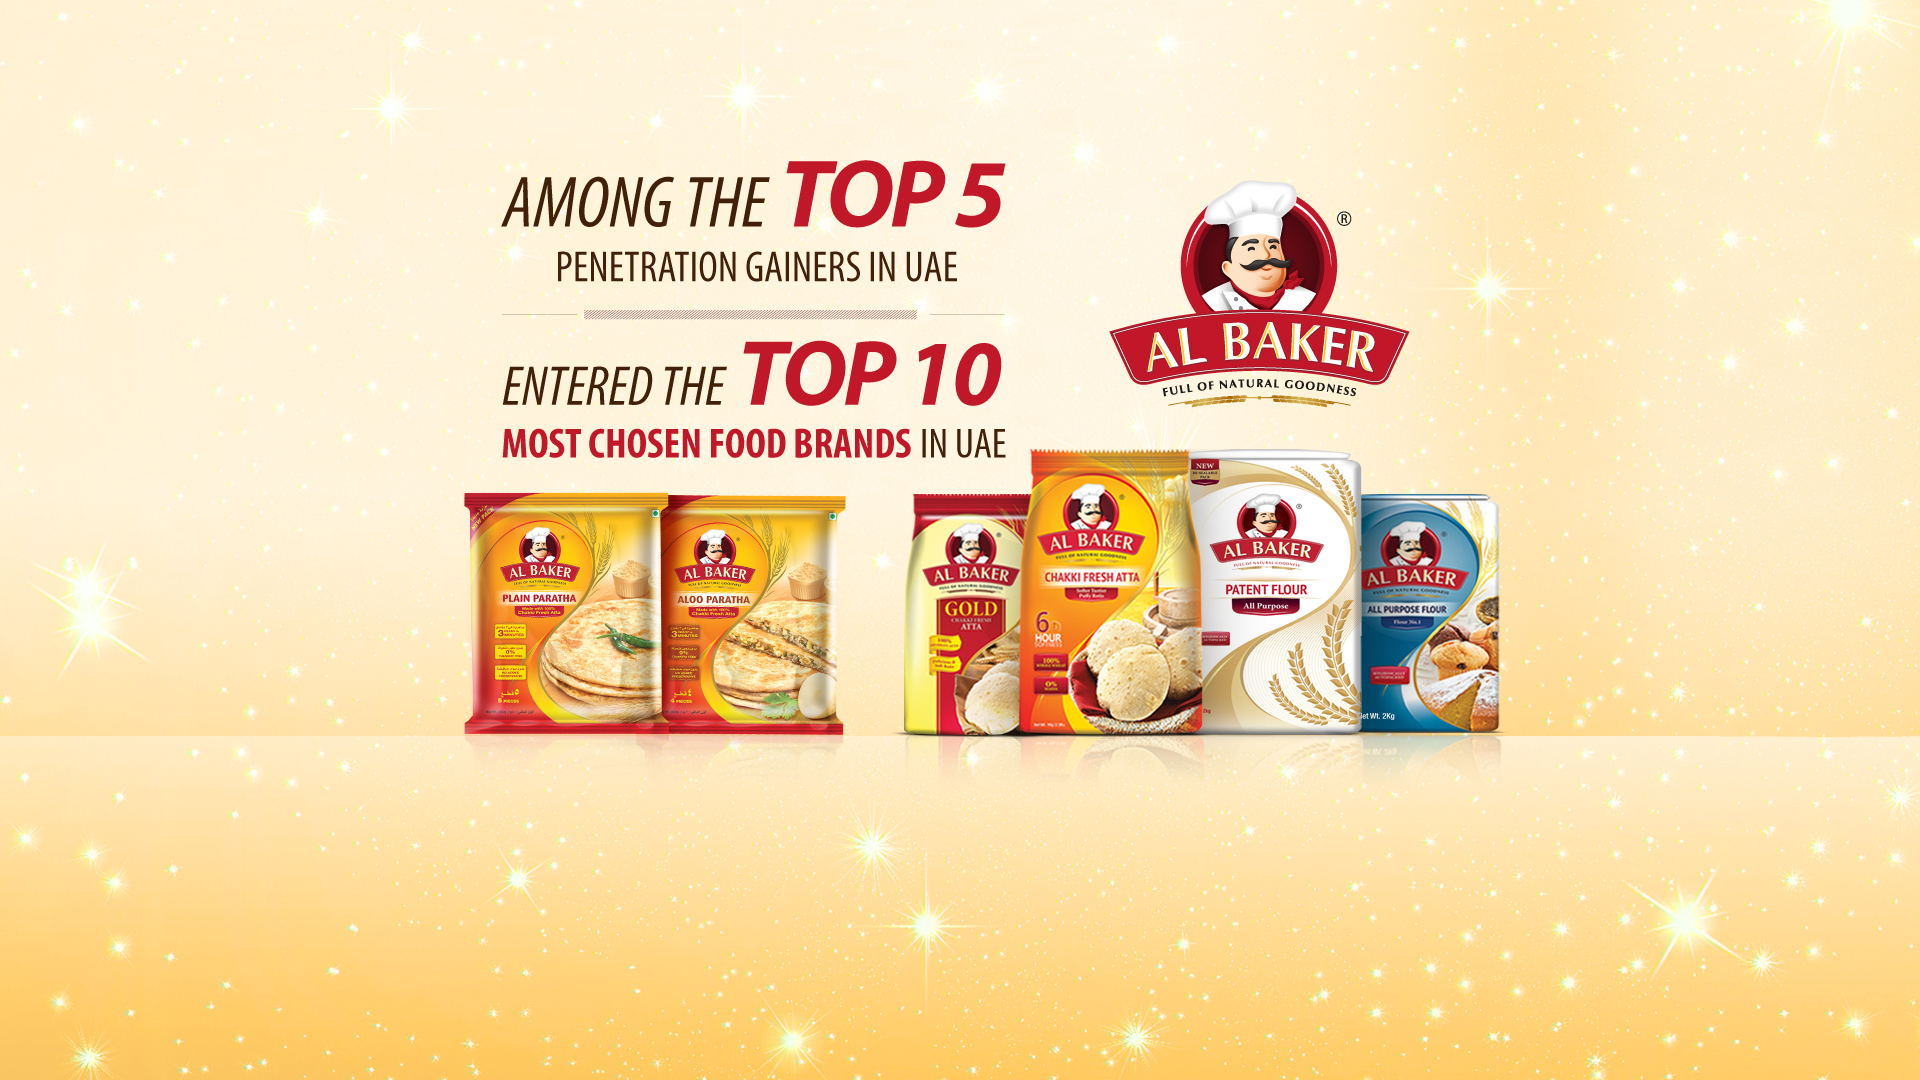 AlBaker is one of the most chosen food brands in the UAE